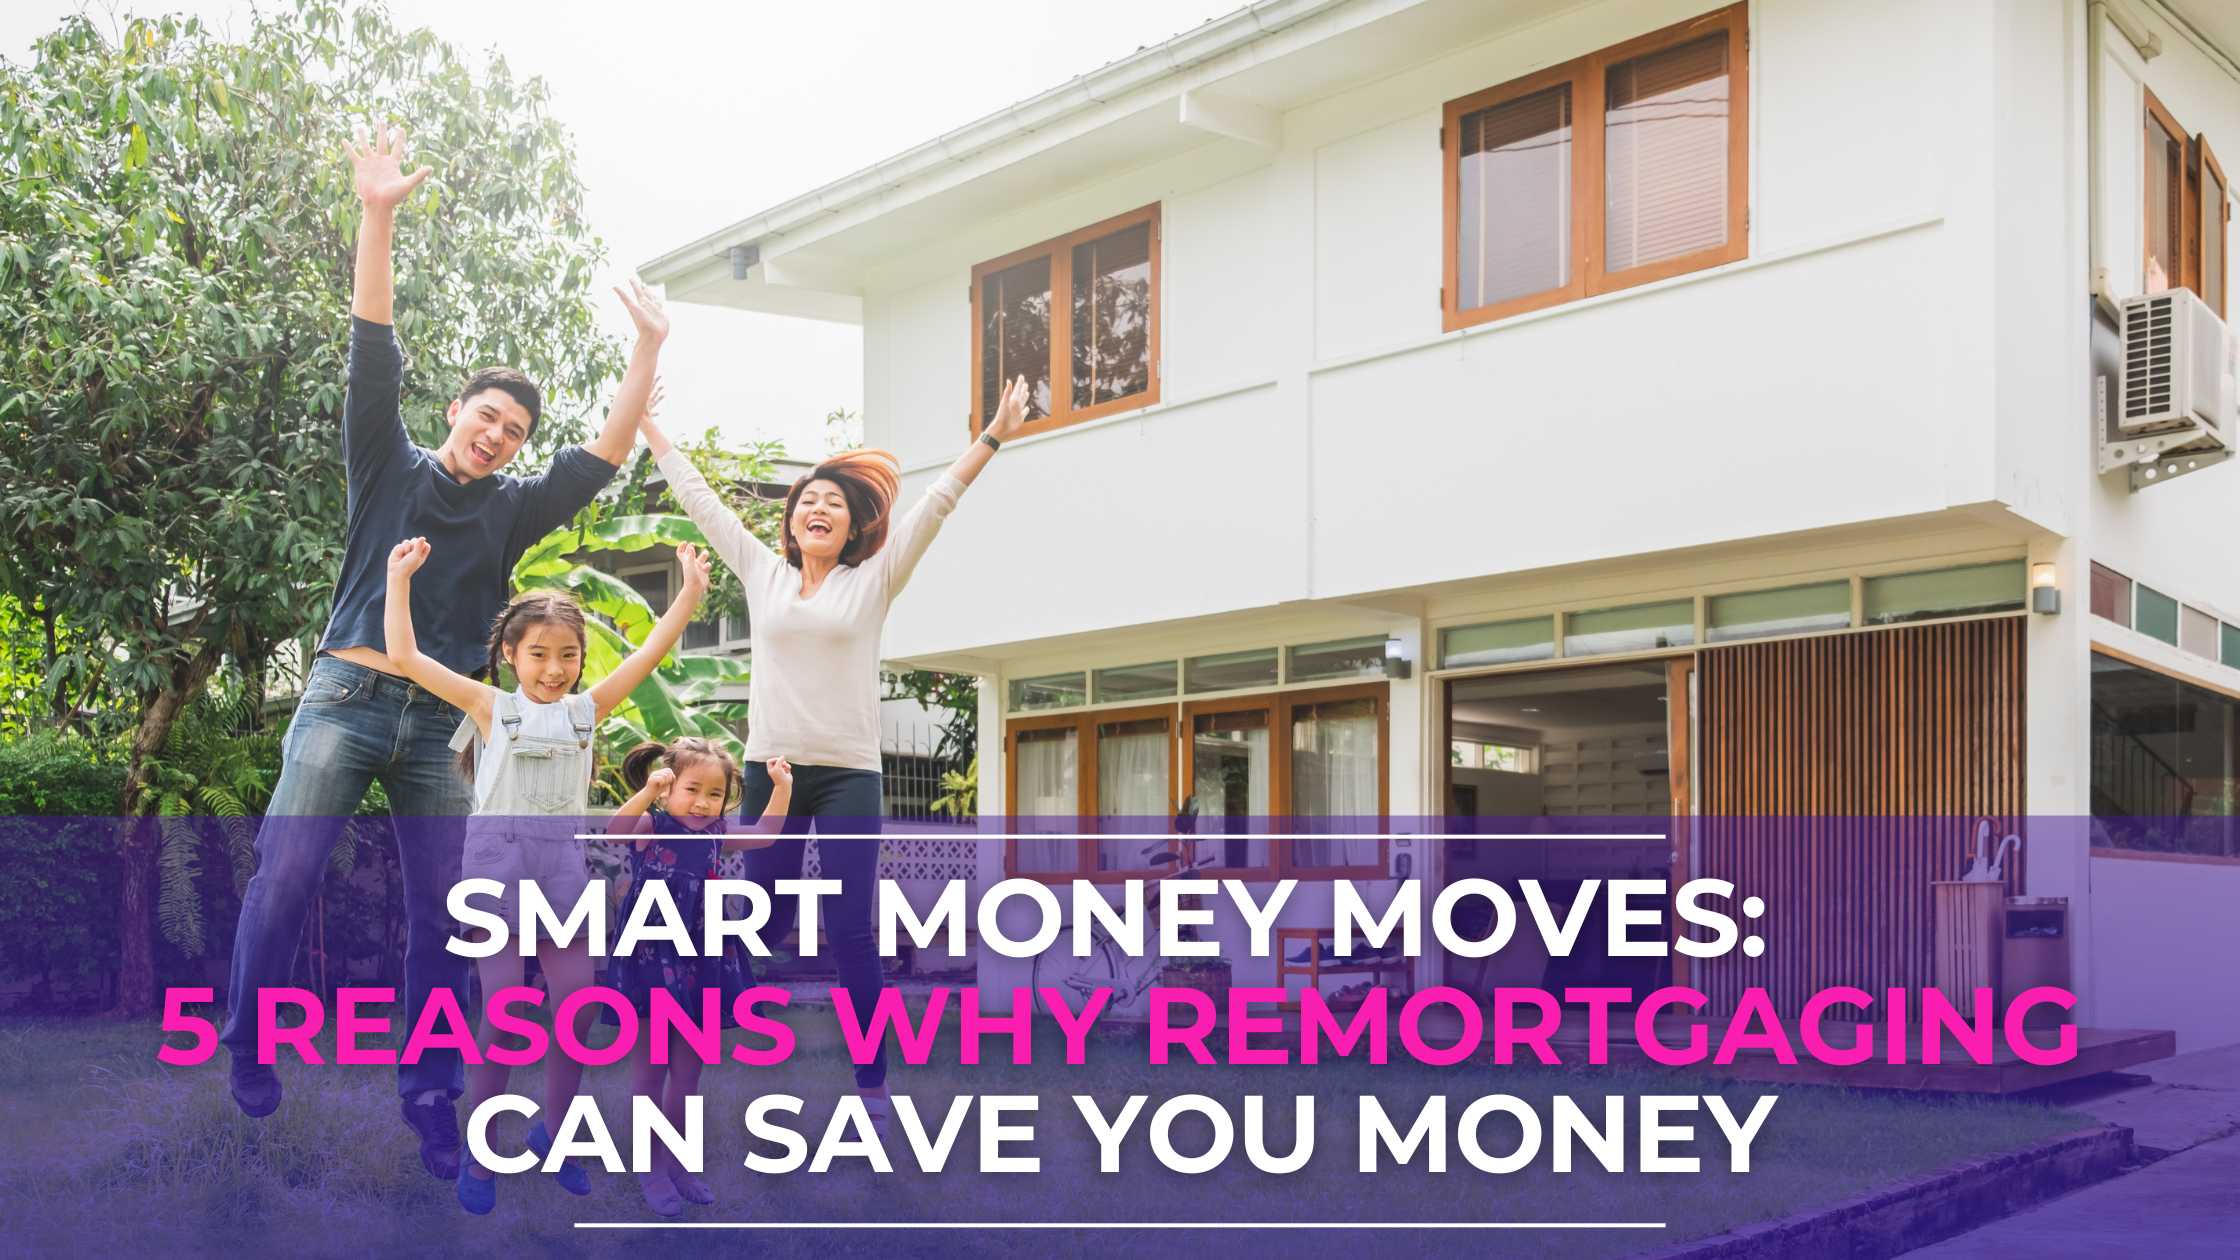 Smart Money Moves: 5 Reasons Why Remortgaging Can Save You Money - LowQuotes